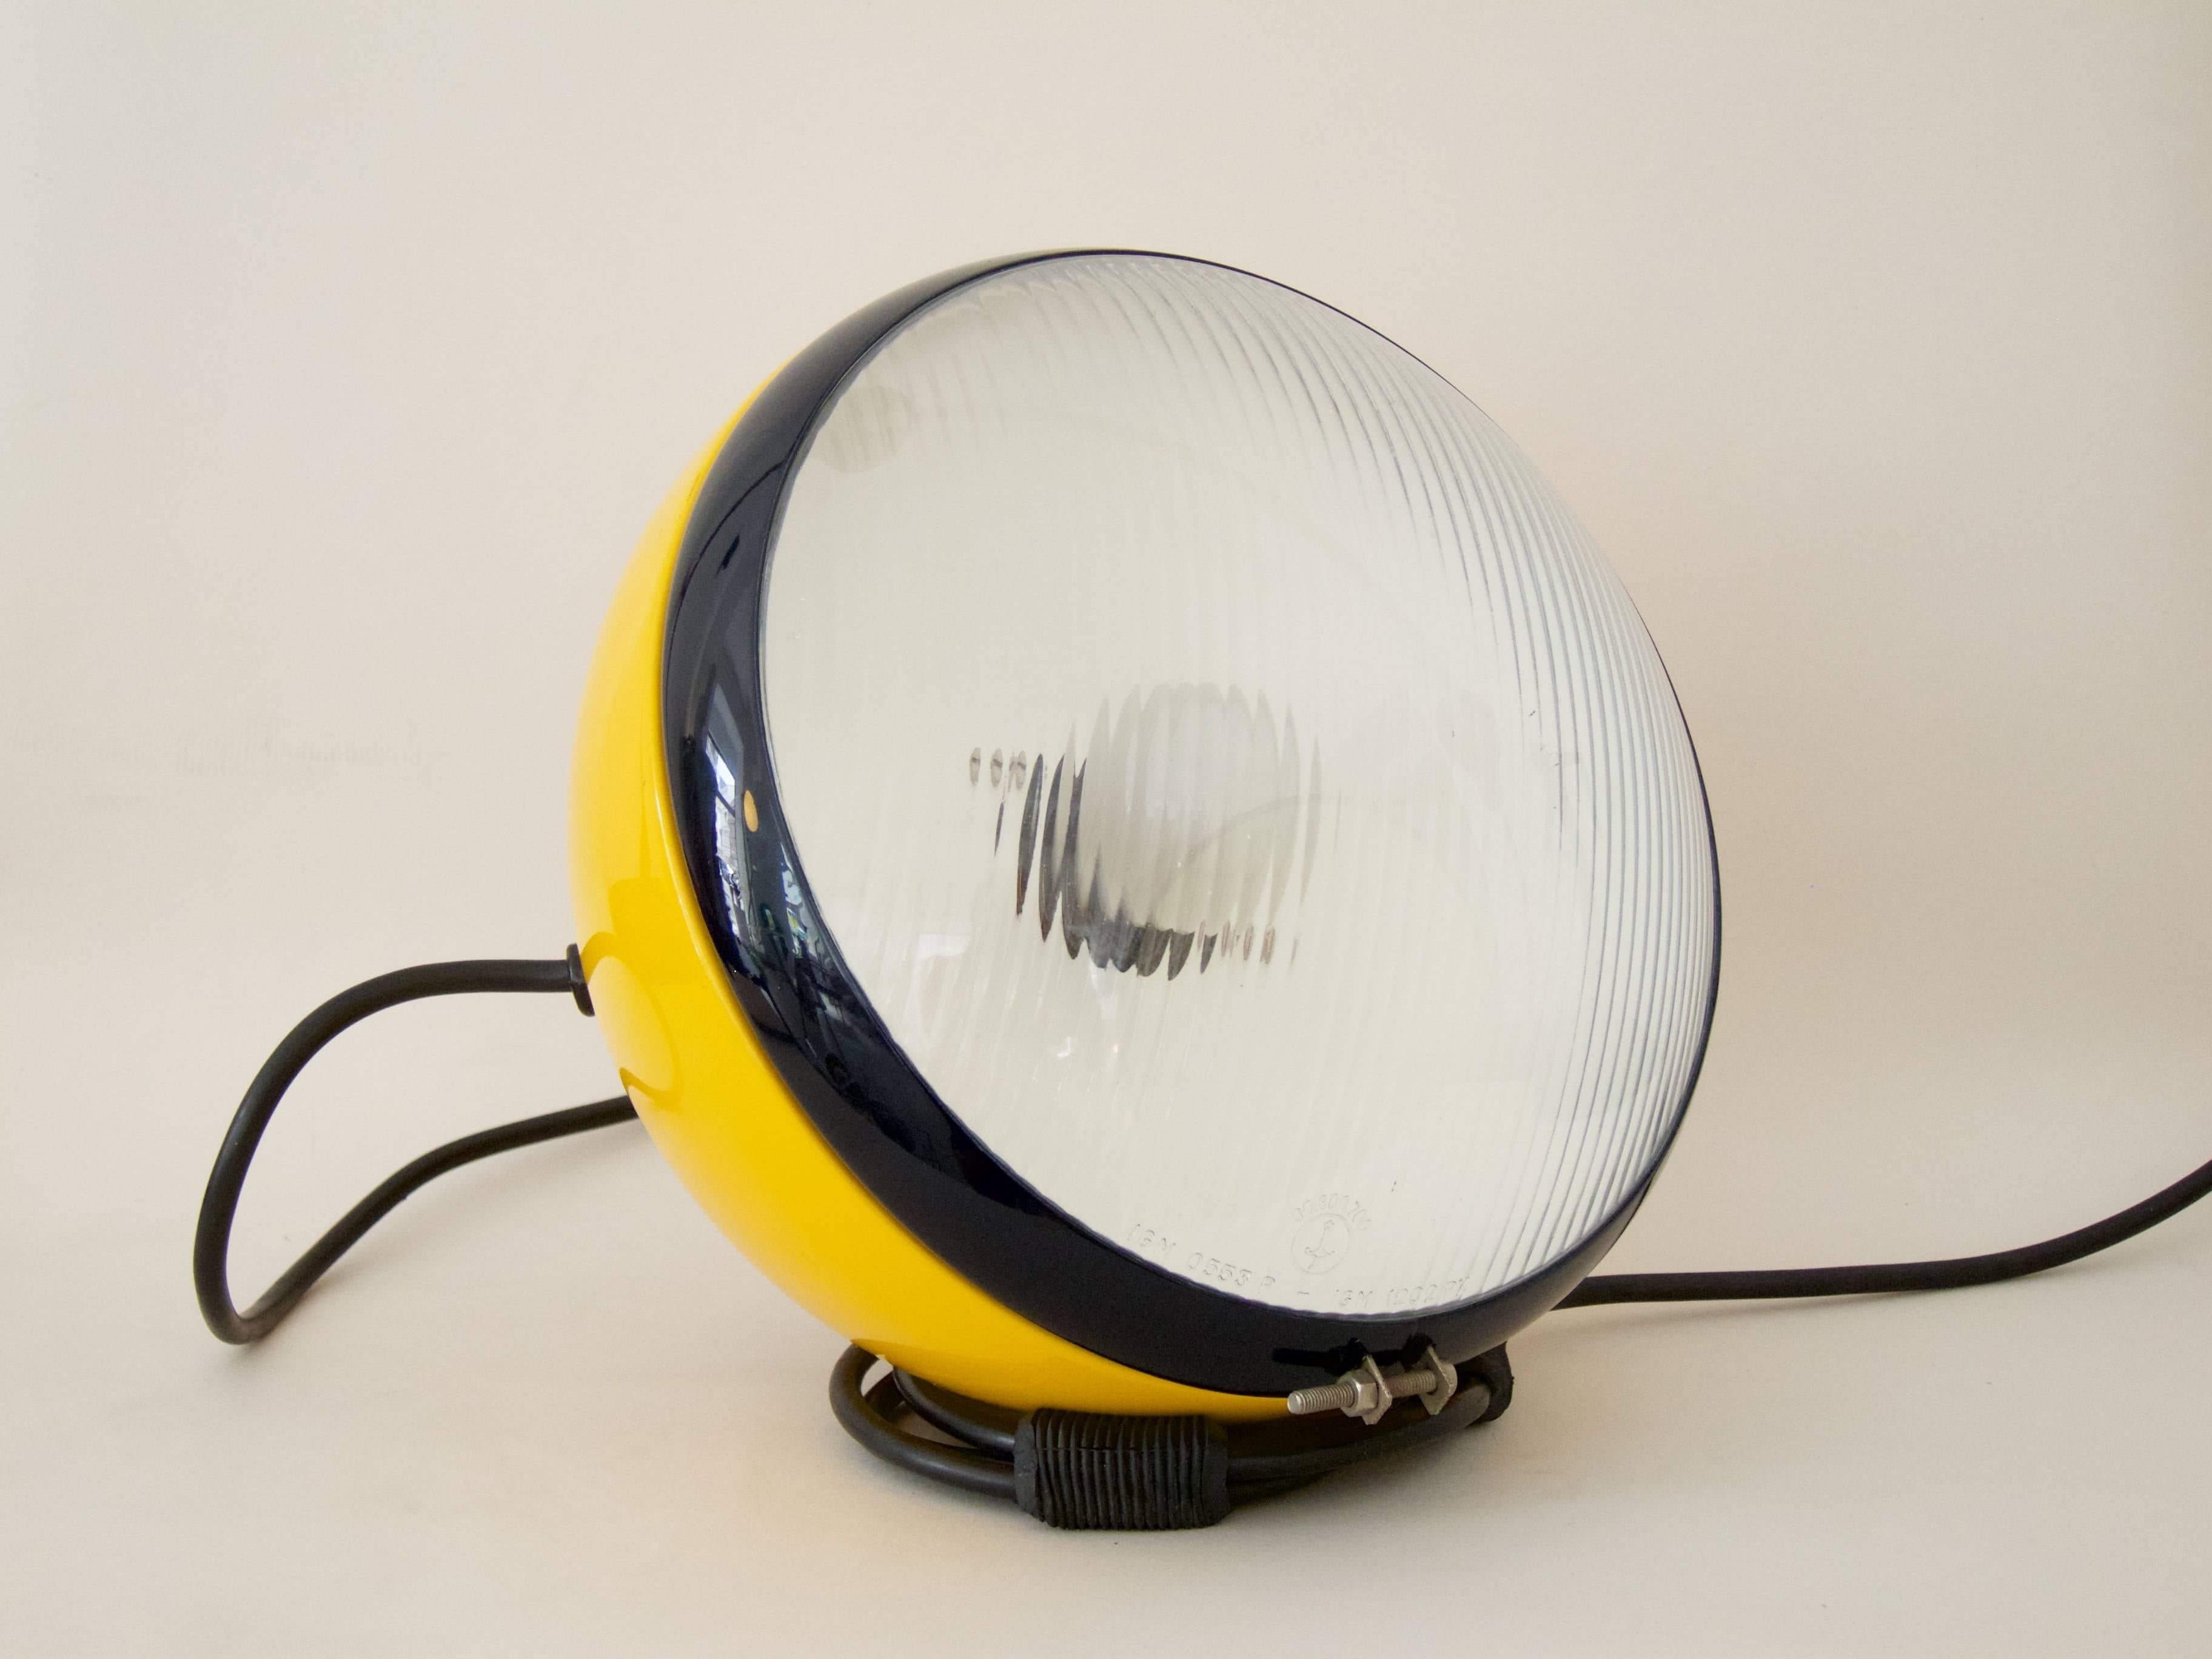 A very rare light object "Bowling" designed 1968 by Cesare Leonardi and Franca Stagi for Lumenform.

The design of the lamp was inspired by the headlight of the Fiat 666.
yellow aluminum case,
the coiled cable act as the base for the